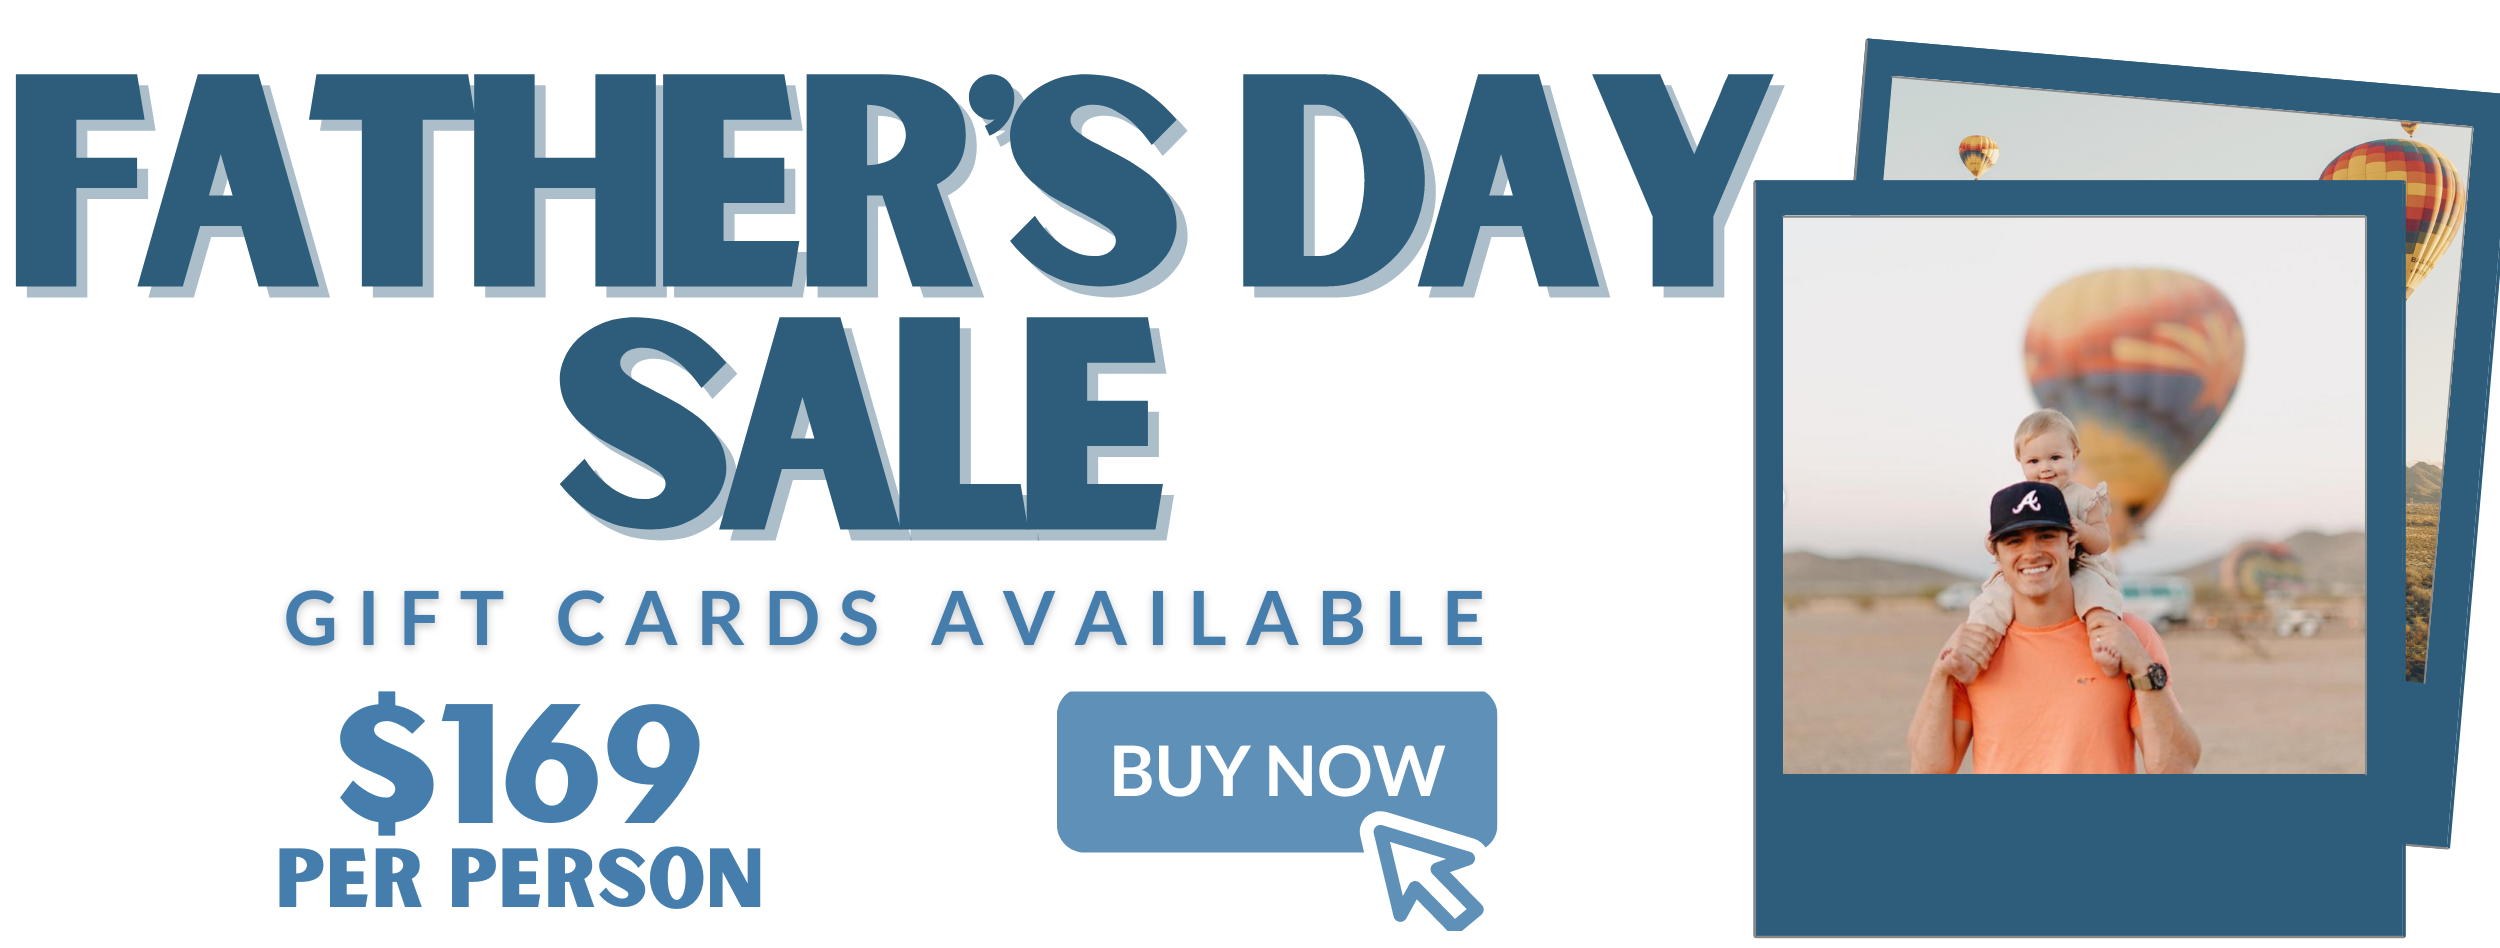 Father's Day Gift Certificate Sale